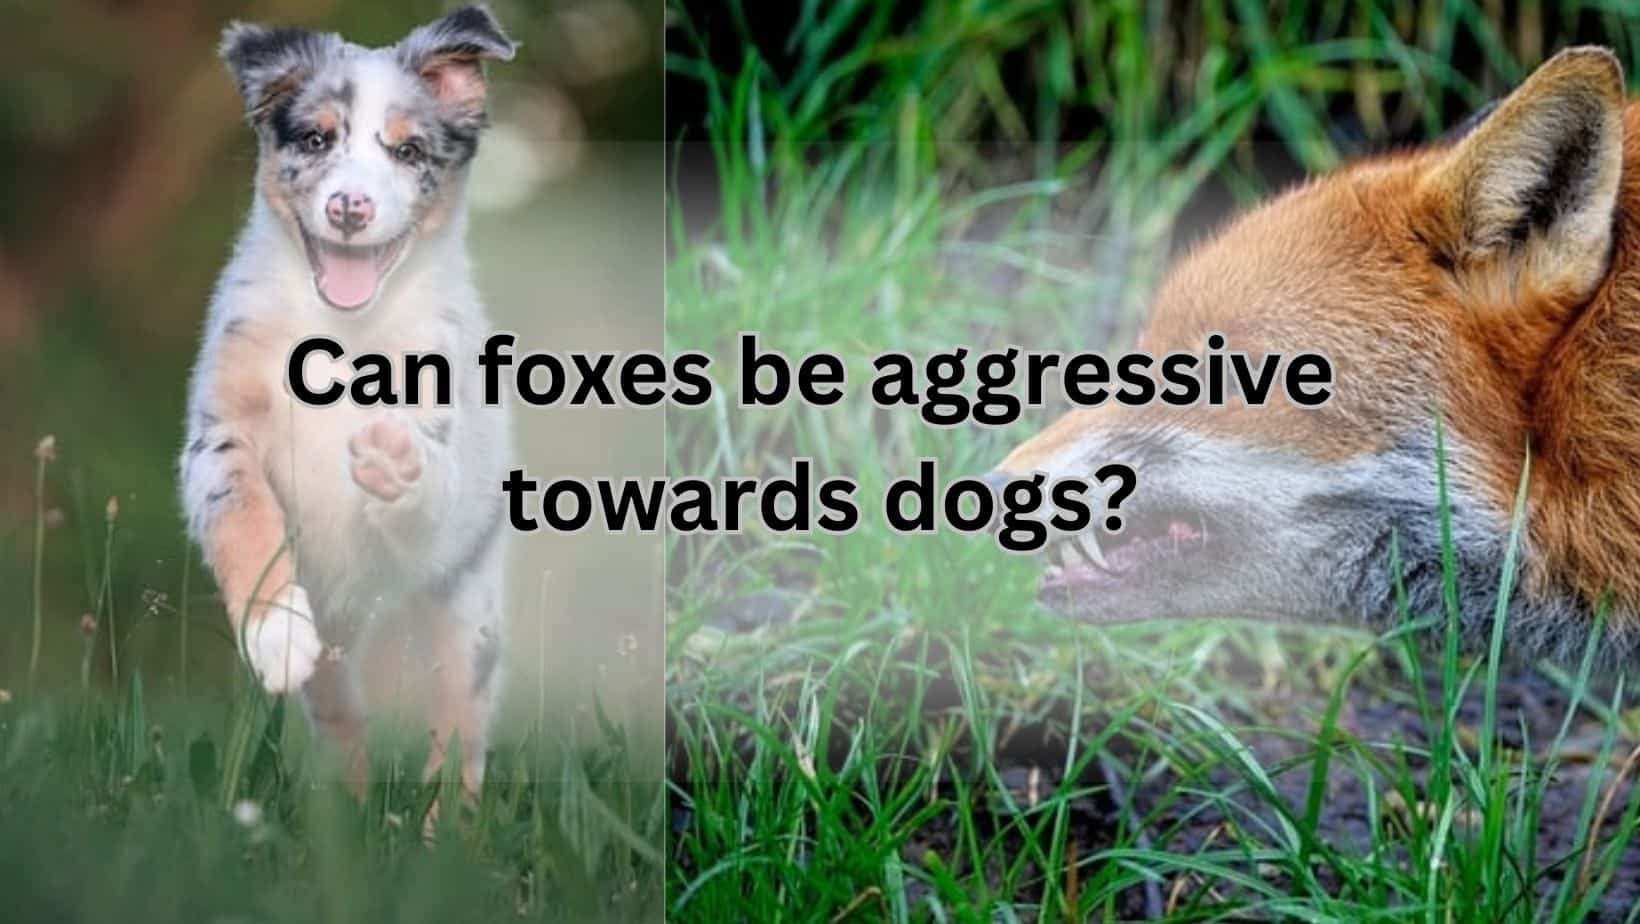 Can foxes be aggressive towards dogs?